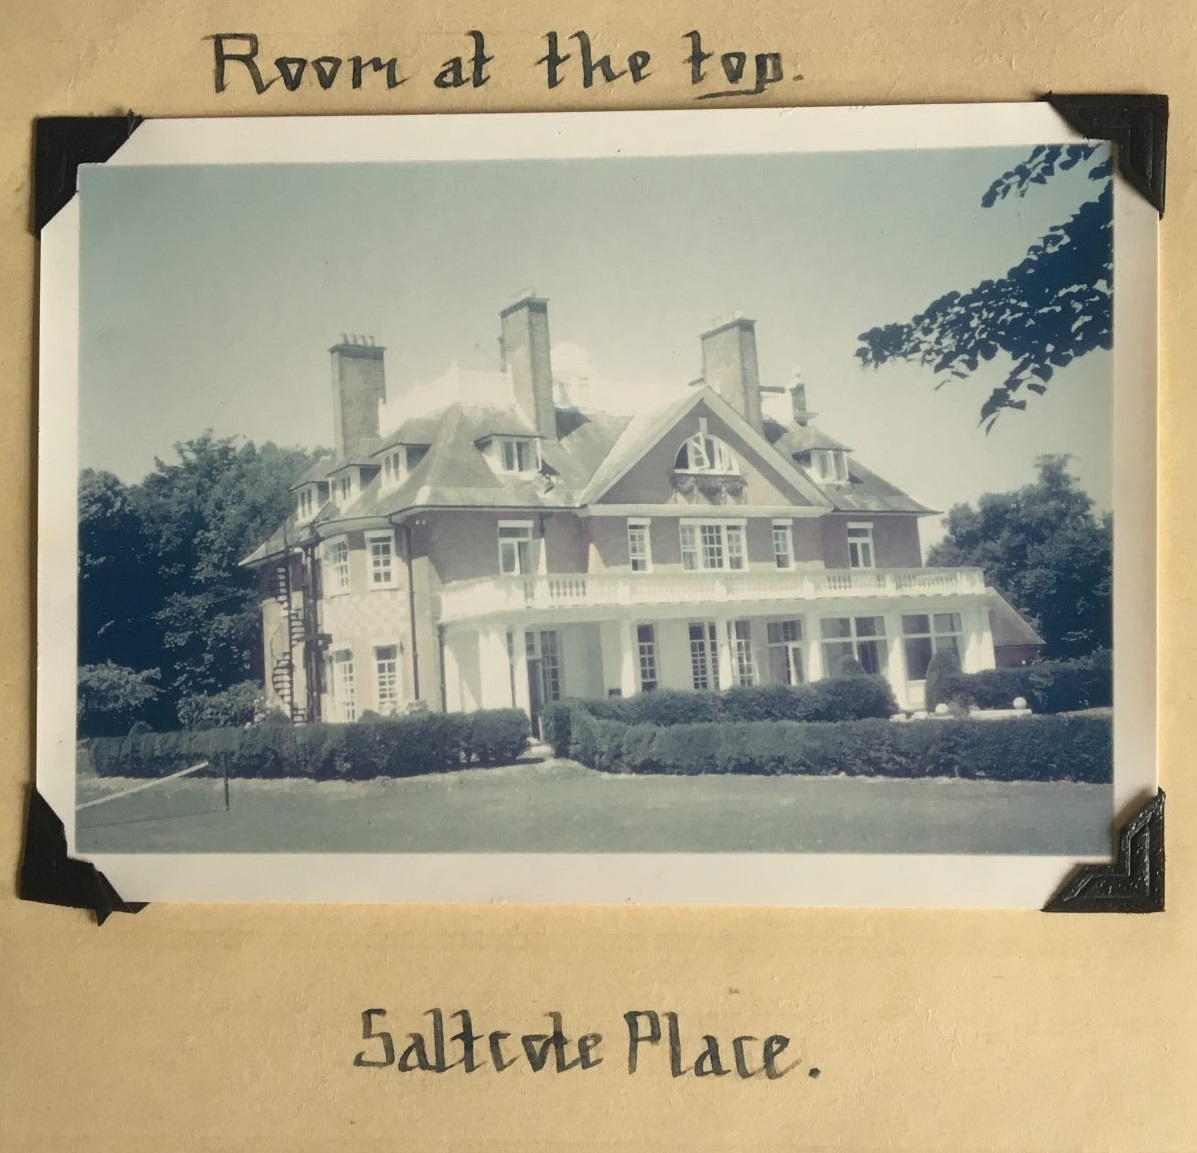 History of Saltcote Place